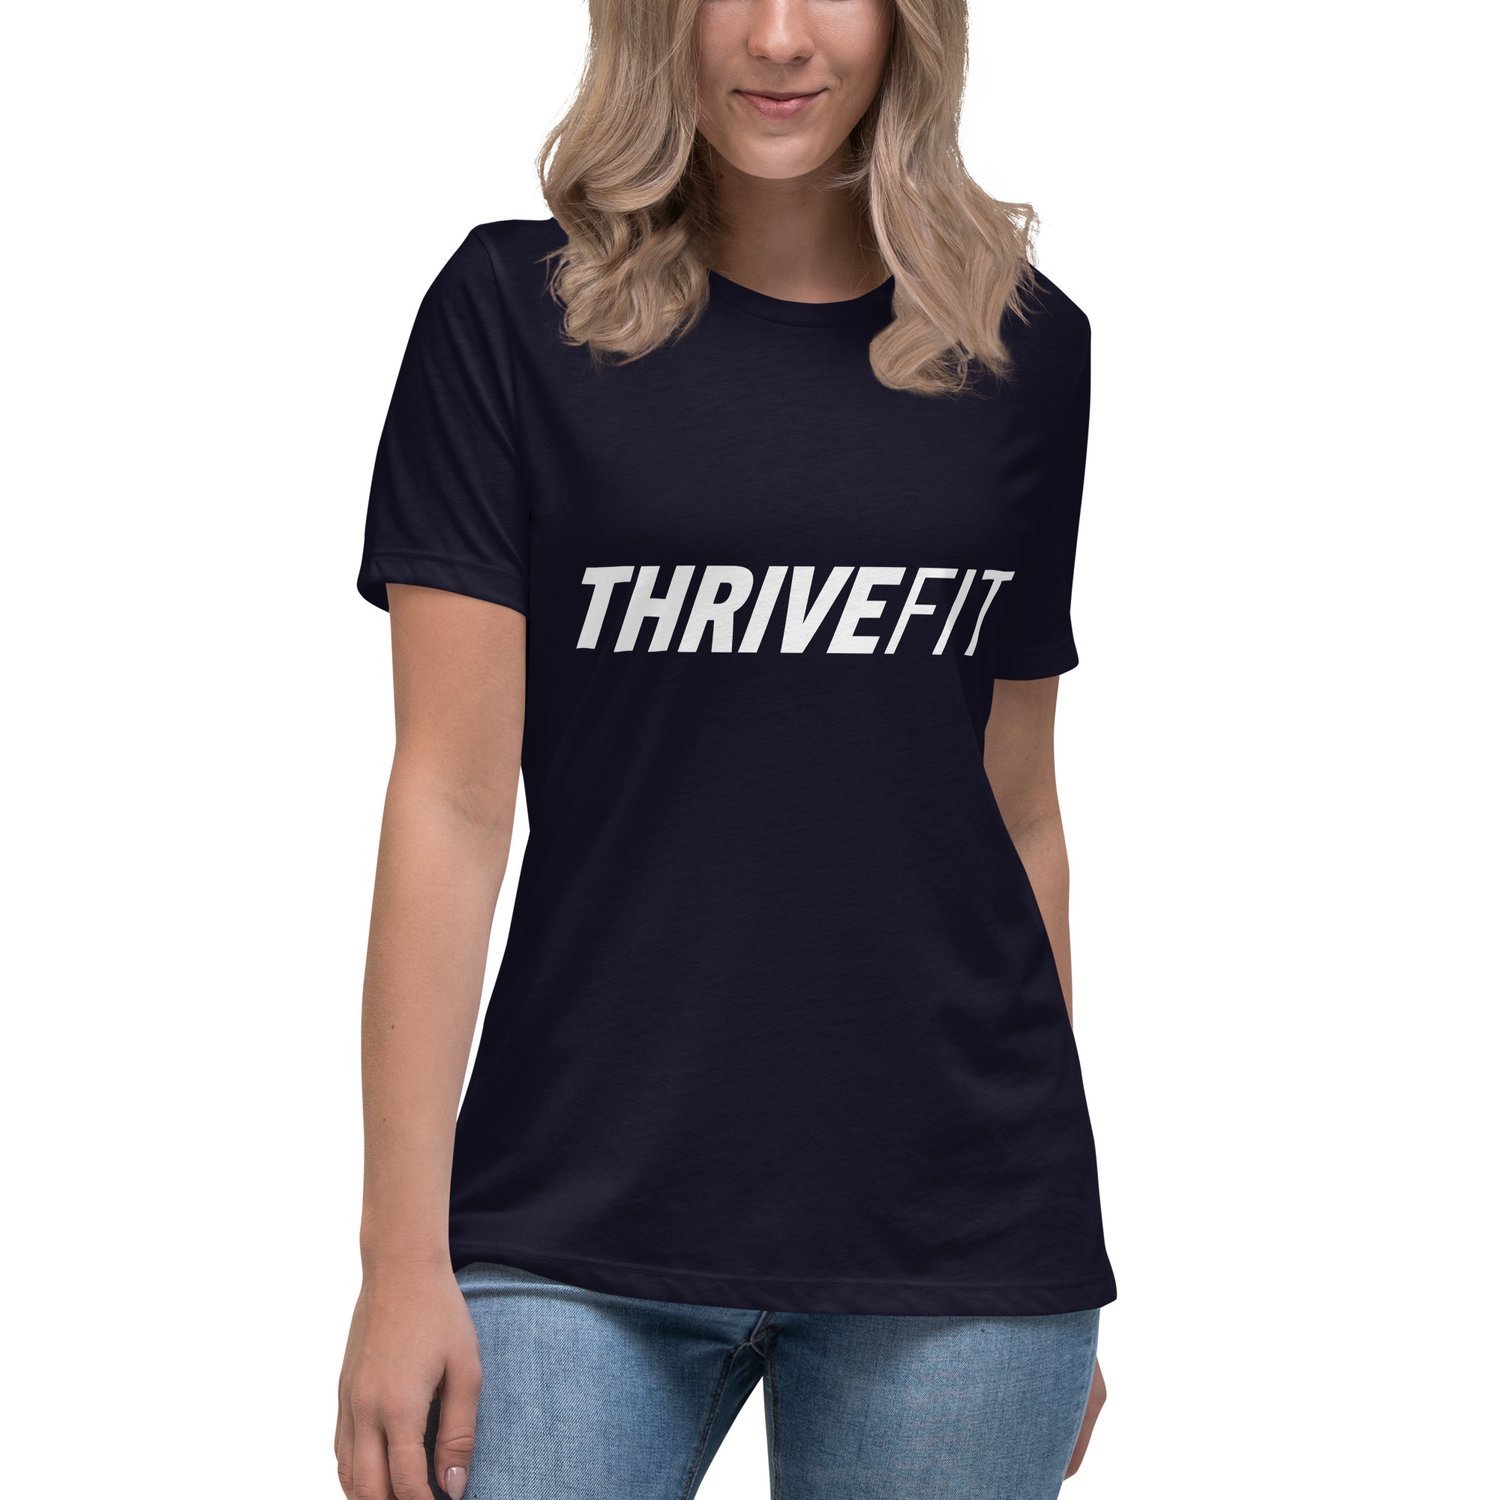 Women's relaxed softest and most comfortable t-shirt you'll ever